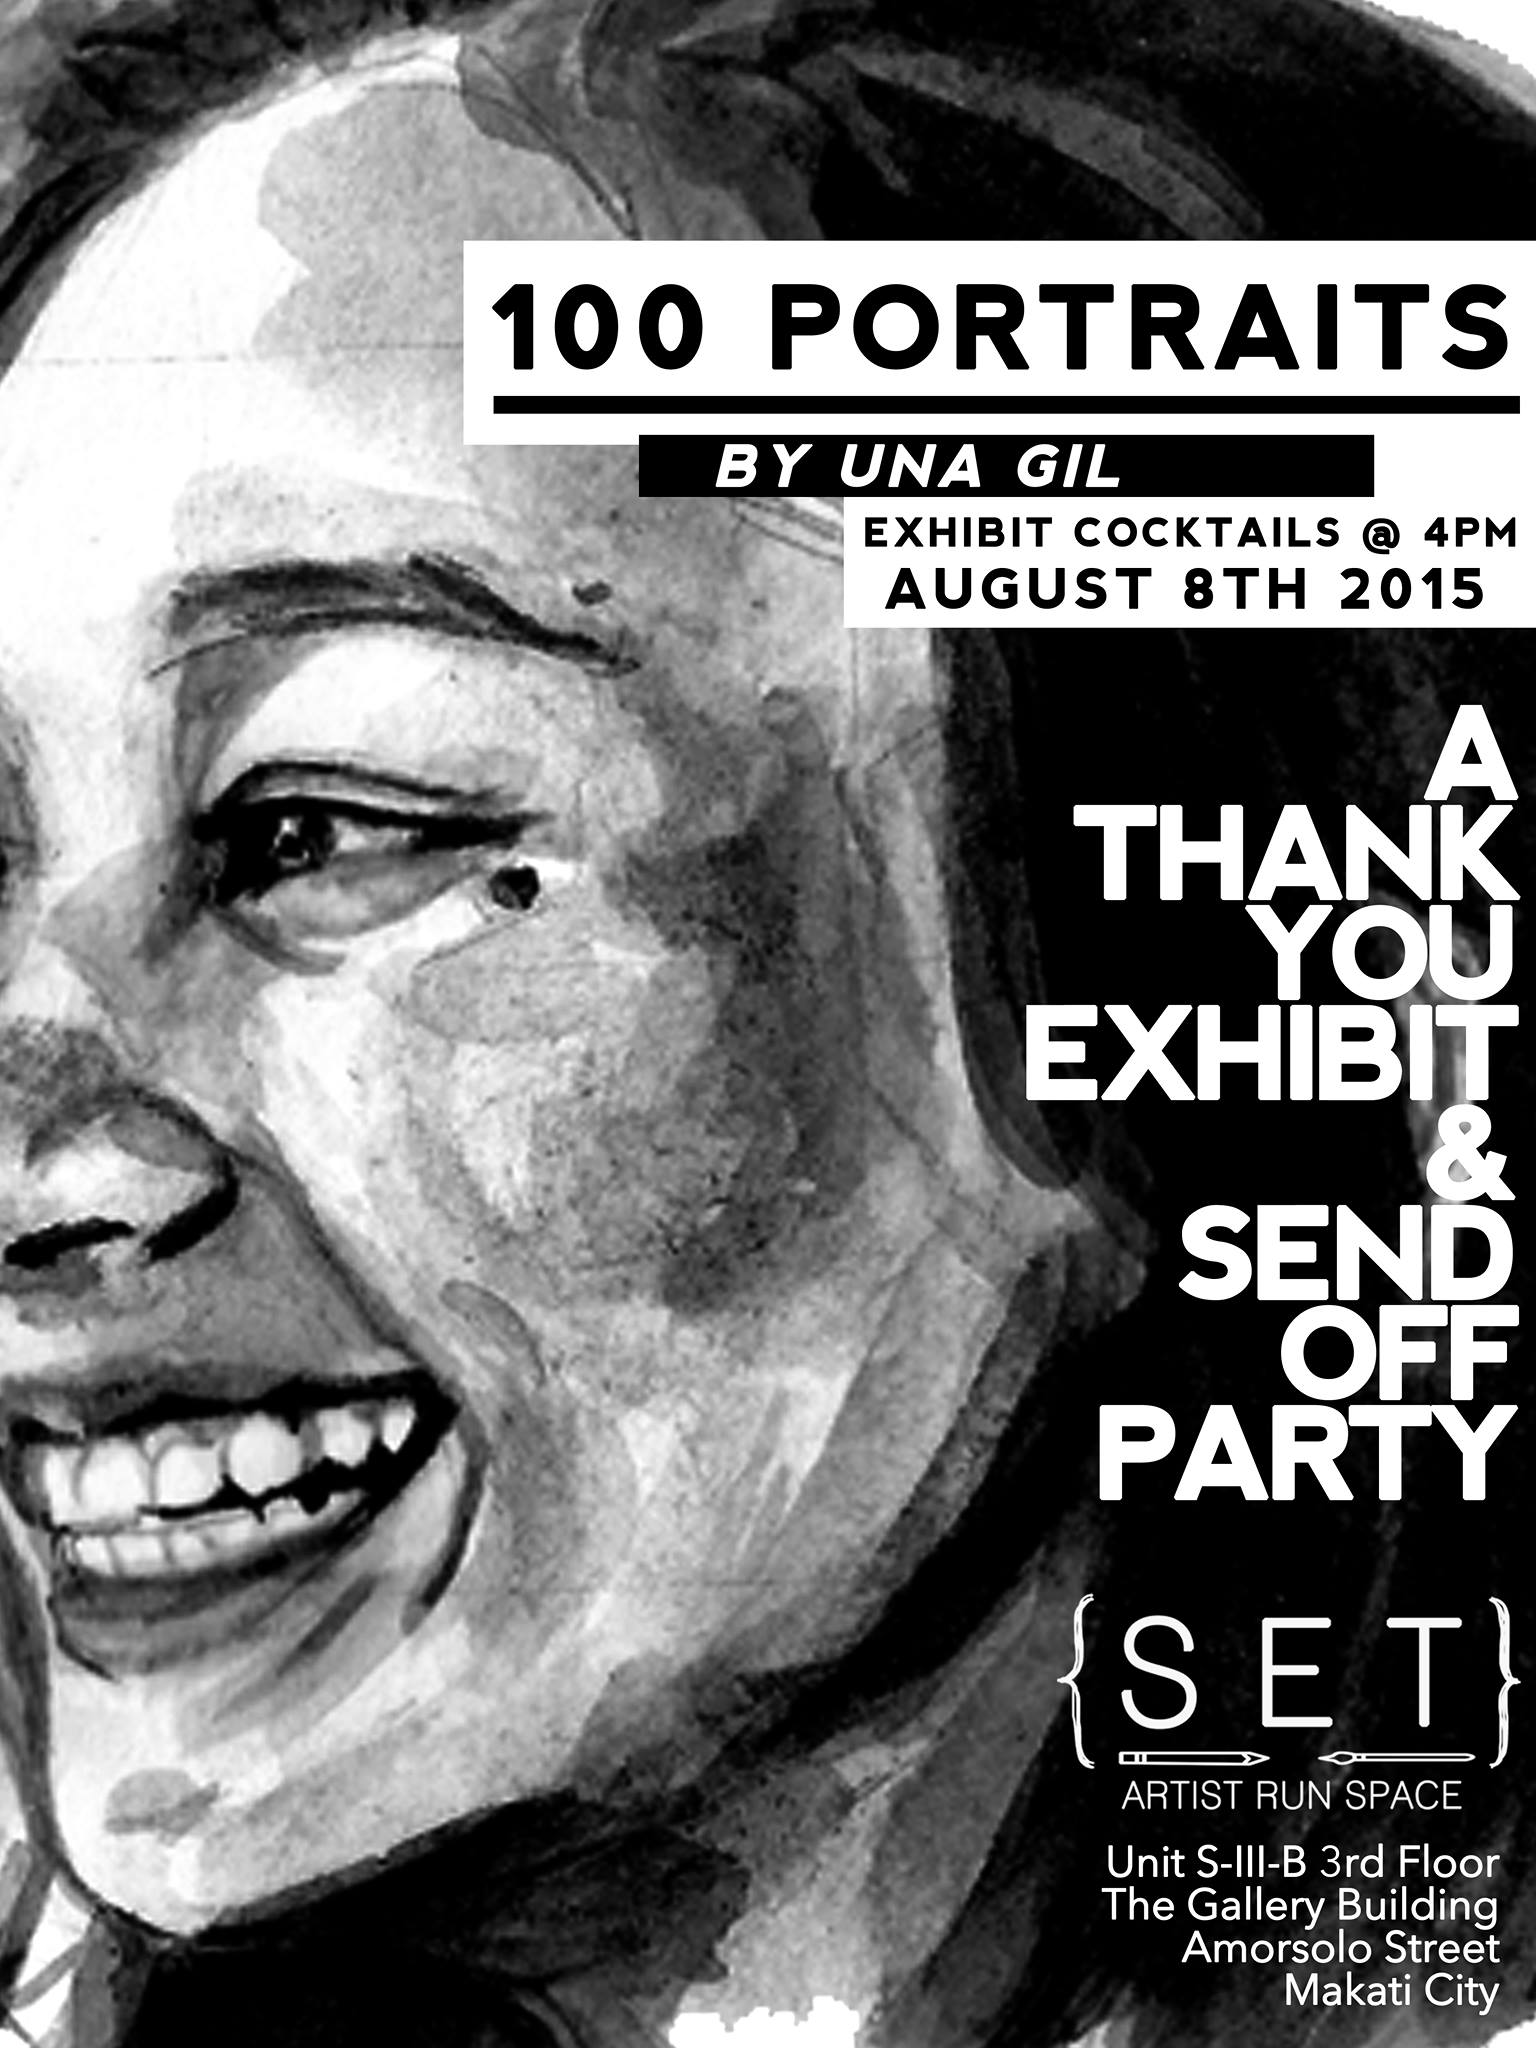 100 Portraits by Una Gil     Saturday, August 8     at 4:00pm - 8:00pm     4 days from now · 86°F / 76°F Thunderstorm     	     Show Map     SET Artist Run Space     Unit S-III-B, 3rd Floor, The Gallery Building, Amorsolo Street, 1231 Makati 100 Portraits by Una Gil Young artist, Una Gil, mounts her first exhibition at Set Artist Run Space this August 8, 2015 at 4PM. Not even in her first year of college, Una Gil has been hard at work to reach her goal. Balancing studying art, painting, dancing, graduating from high school, and vying for acceptance into universities is no small feat. Yet, through perseverance and dedication she was able to complete all her tasks with a smile on her face and her head held up high. Not only that, Una has been accepted into every art school to which she applied, and ultimately achieved her goal - admission into the prestigious art school, Emily Carr University of Art + Design in Canada. Only 17 years old and not wanting to put the burden on her family, Una has been hard at work raising funds for her tuition by painting 100 watercolor portraits of family, friends, and clients who have contacted her along the way. All of this done in a few months time. Her watercolor portraits are all black and white on 5x7’’ watercolor paper. She employed the classical methods of drawing and painting in her portraits. It is very interesting to see her progression from start to finish. The getting to know the medium is evident in her early works and as she progressed you can see how she was able to master her own style using the medium. The show is laid out in chronological order so that the audience may see her growth and progression of technique. We can all learn something from Una’s hard work, that we can all choose our own path and take control of situations that seem larger than us. By taking what we have and developing it to the very best it can be and pushing it forward, we can steer the path to wherever we want to take it. Just ta